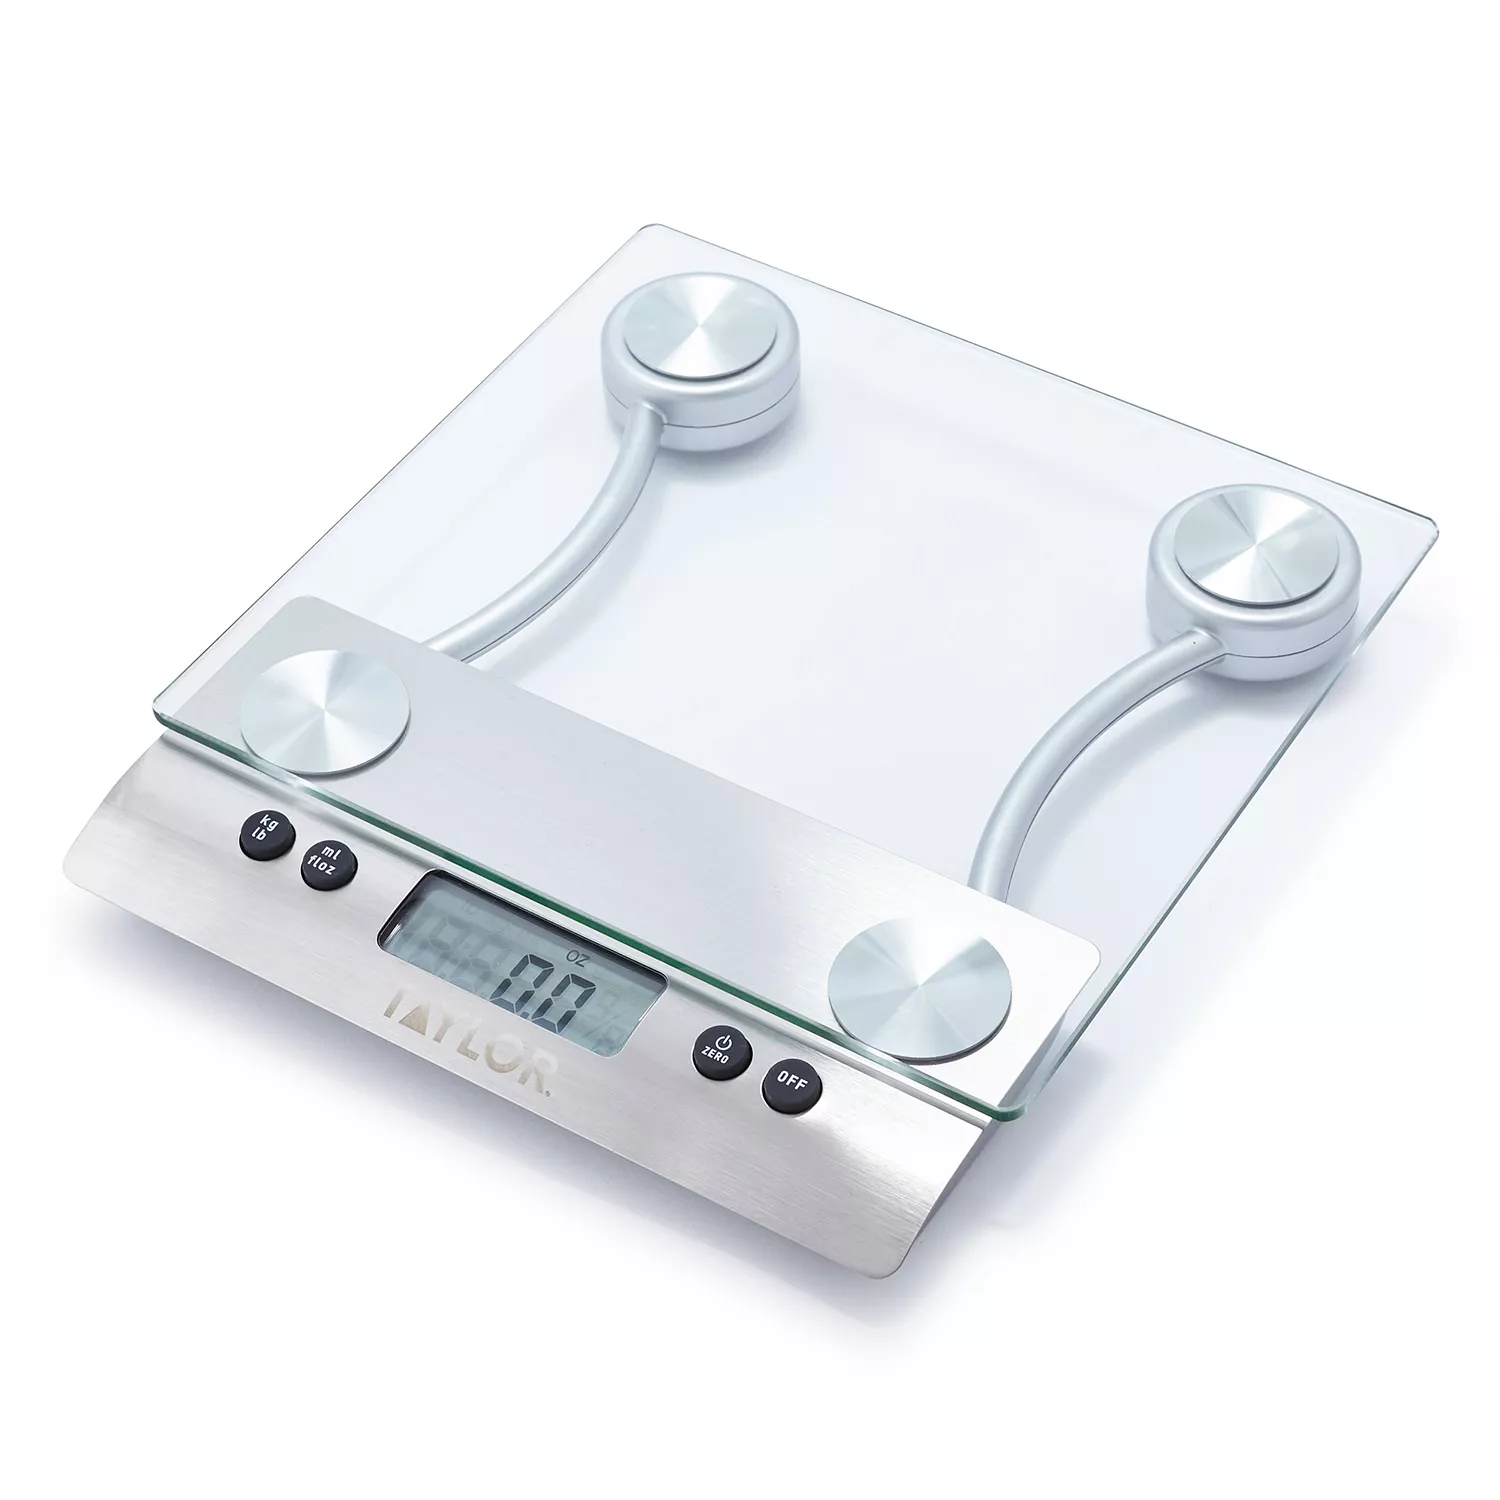 Best Buy: Salter Housewares Aquatronic Kitchen Scale Stainless